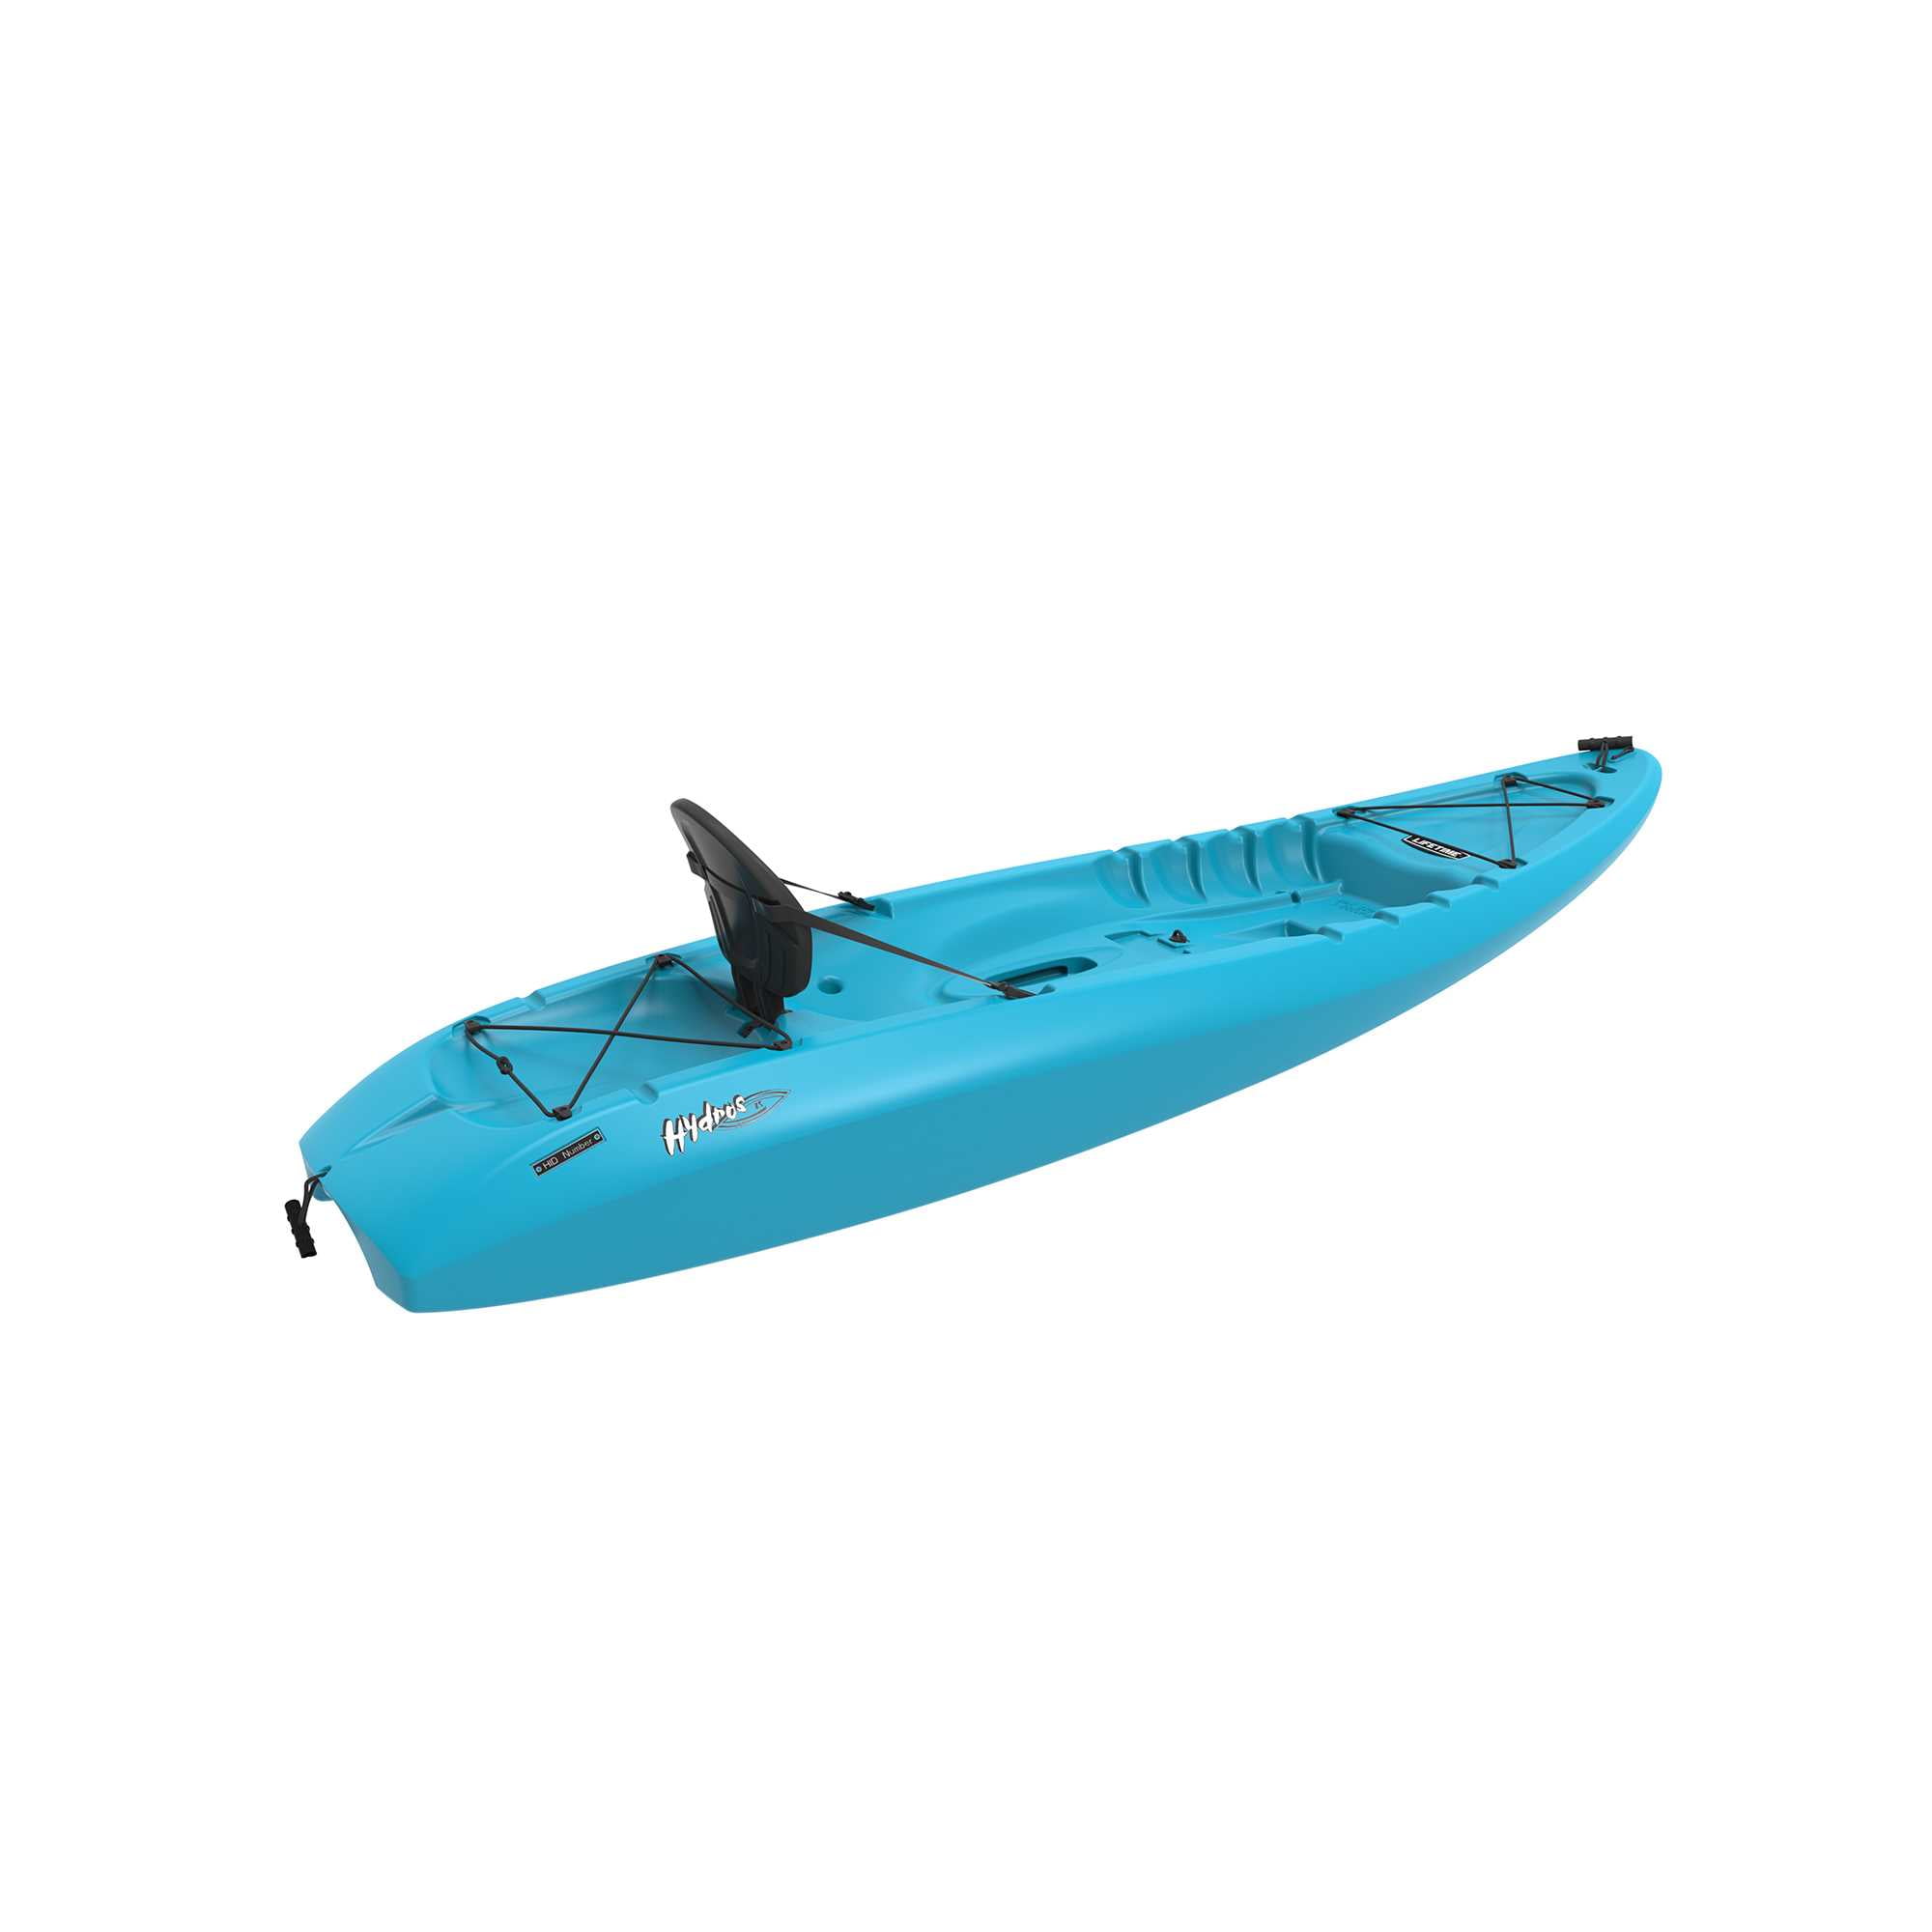 Lifetime Hydros 8 Ft. 5 In. Sit-on-top Kayak with Paddle, 90595